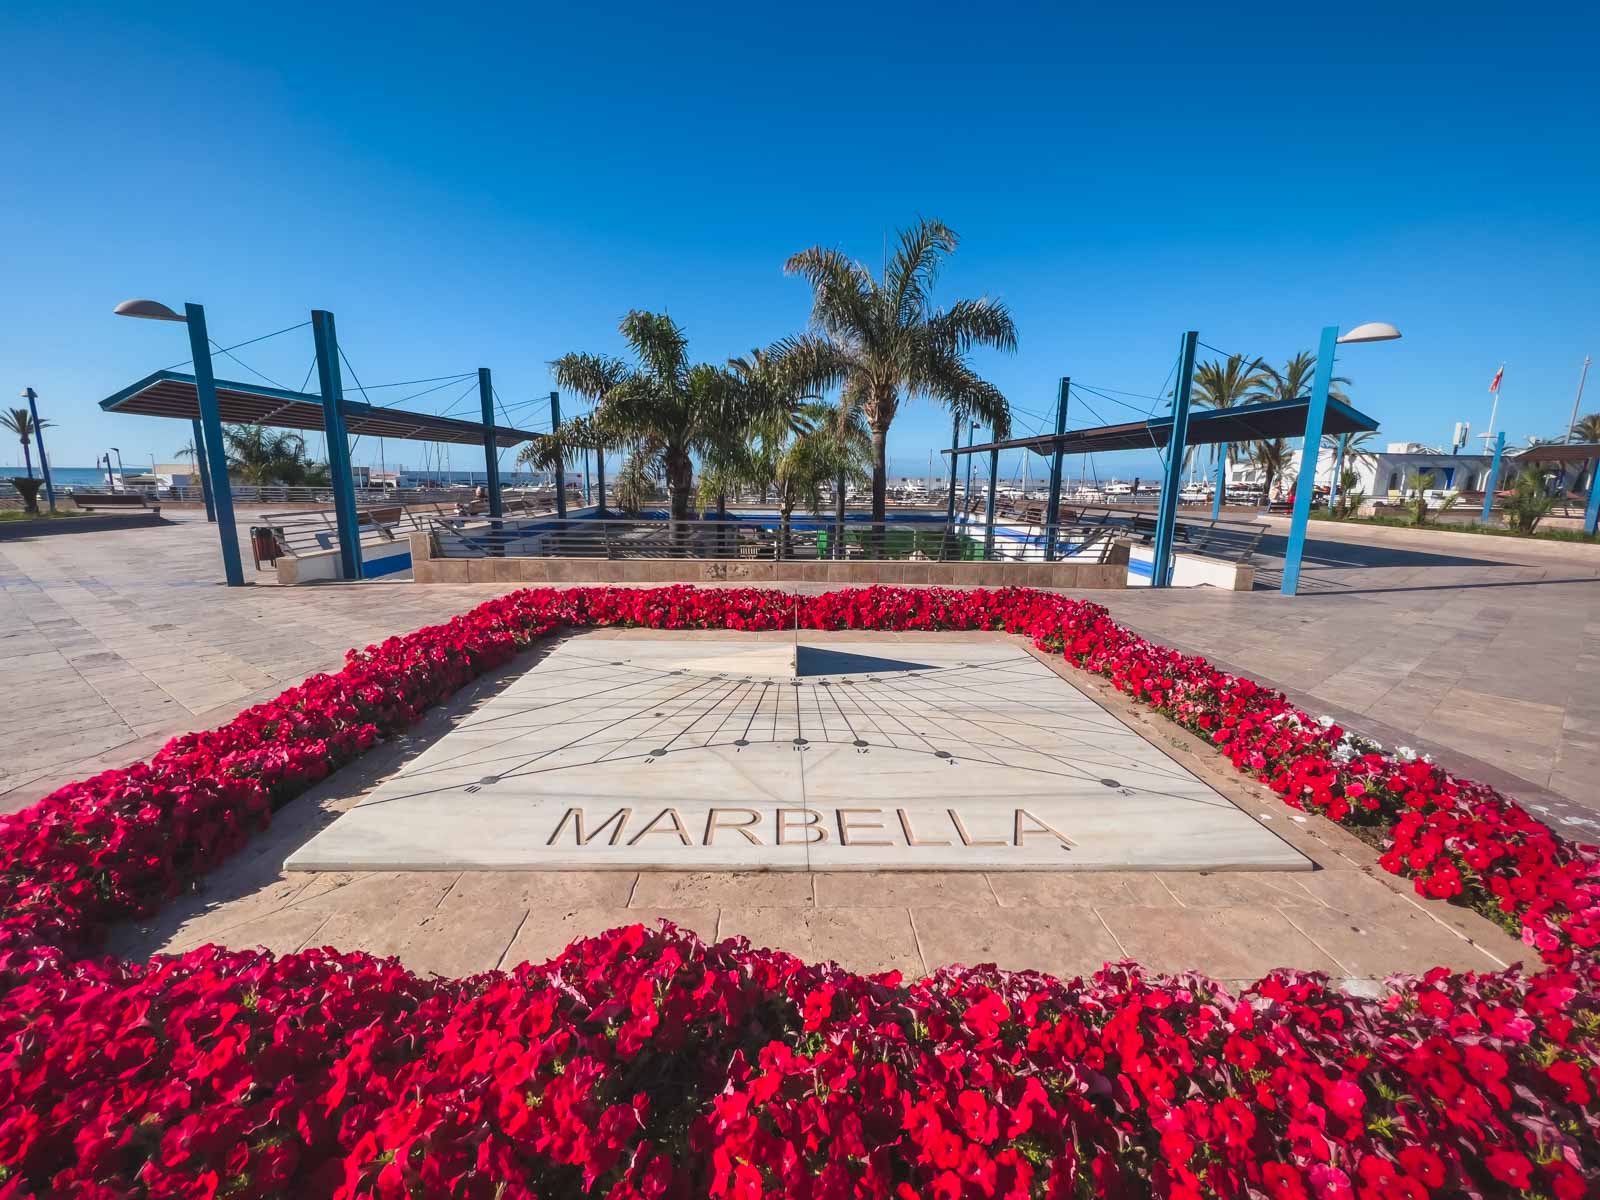 25 Of The Best Things to do in Marbella, Spain